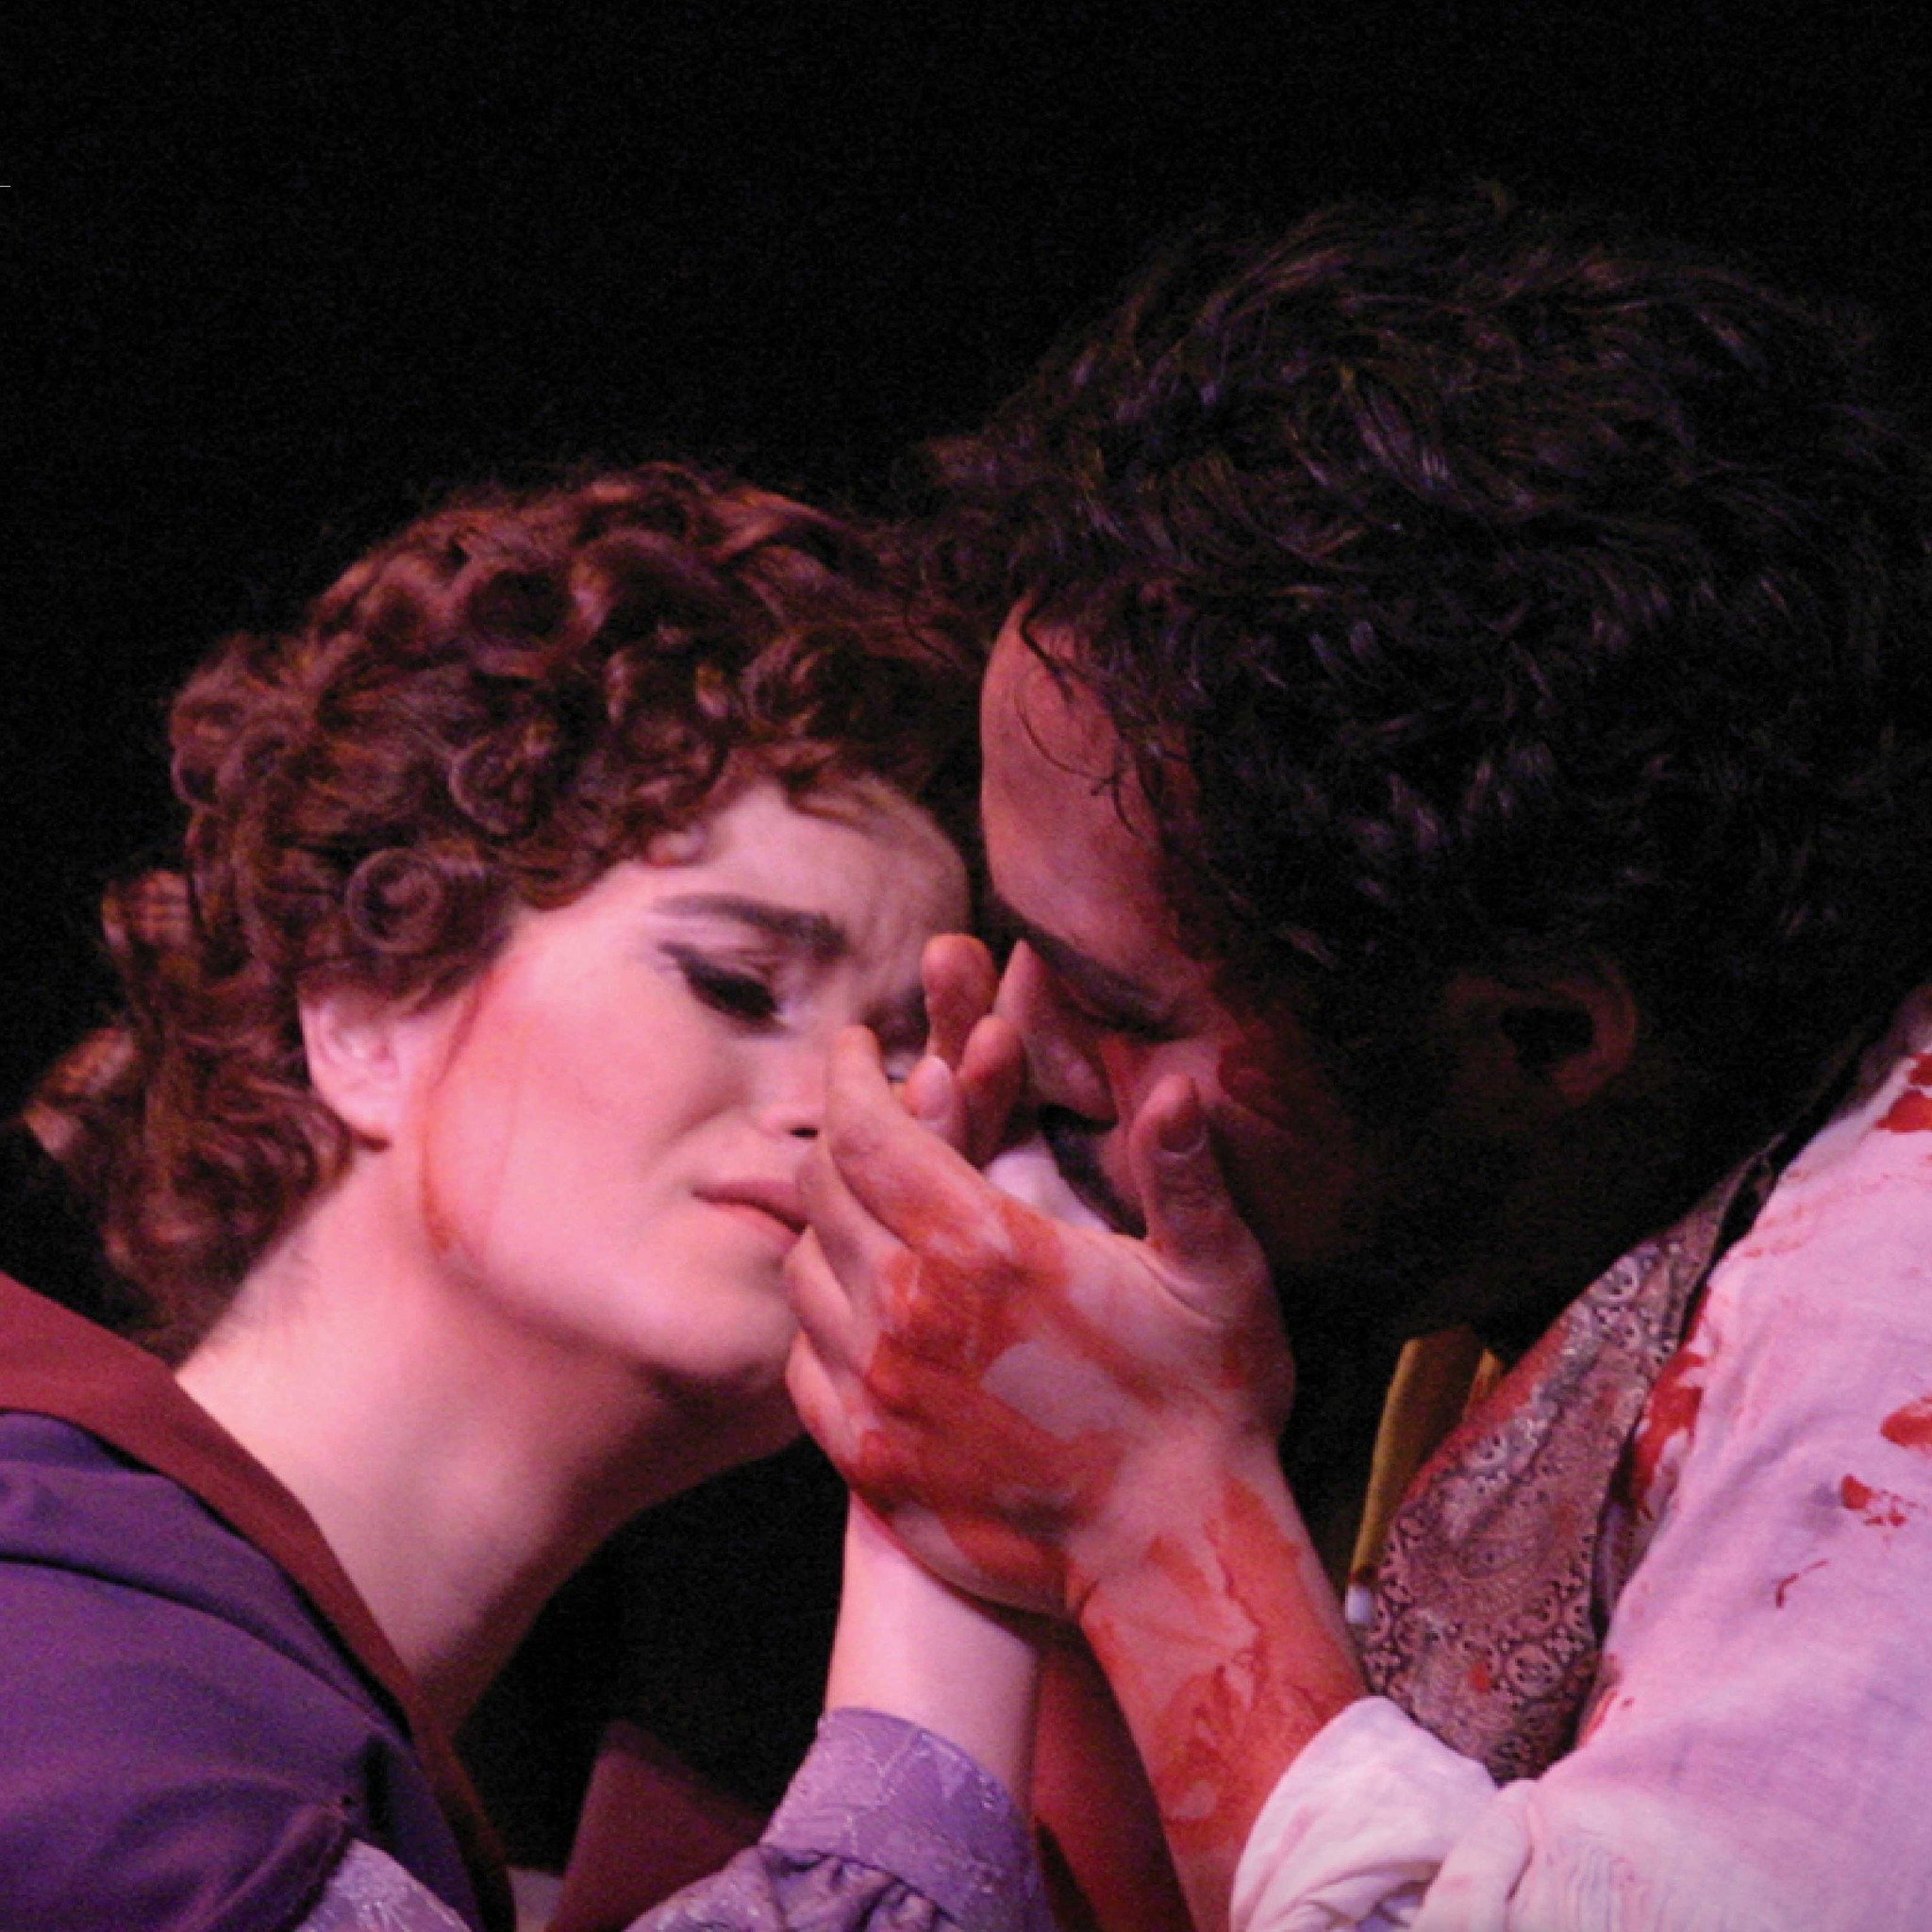 Our friends at Dayton Opera invite you to head north this weekend (April 20 &amp; 21) to experience TOSCA at the beautiful Schuster Center&mdash;and they&rsquo;re making it irresistible by offering all Cincinnati Opera fans 20% off ticket prices! Use